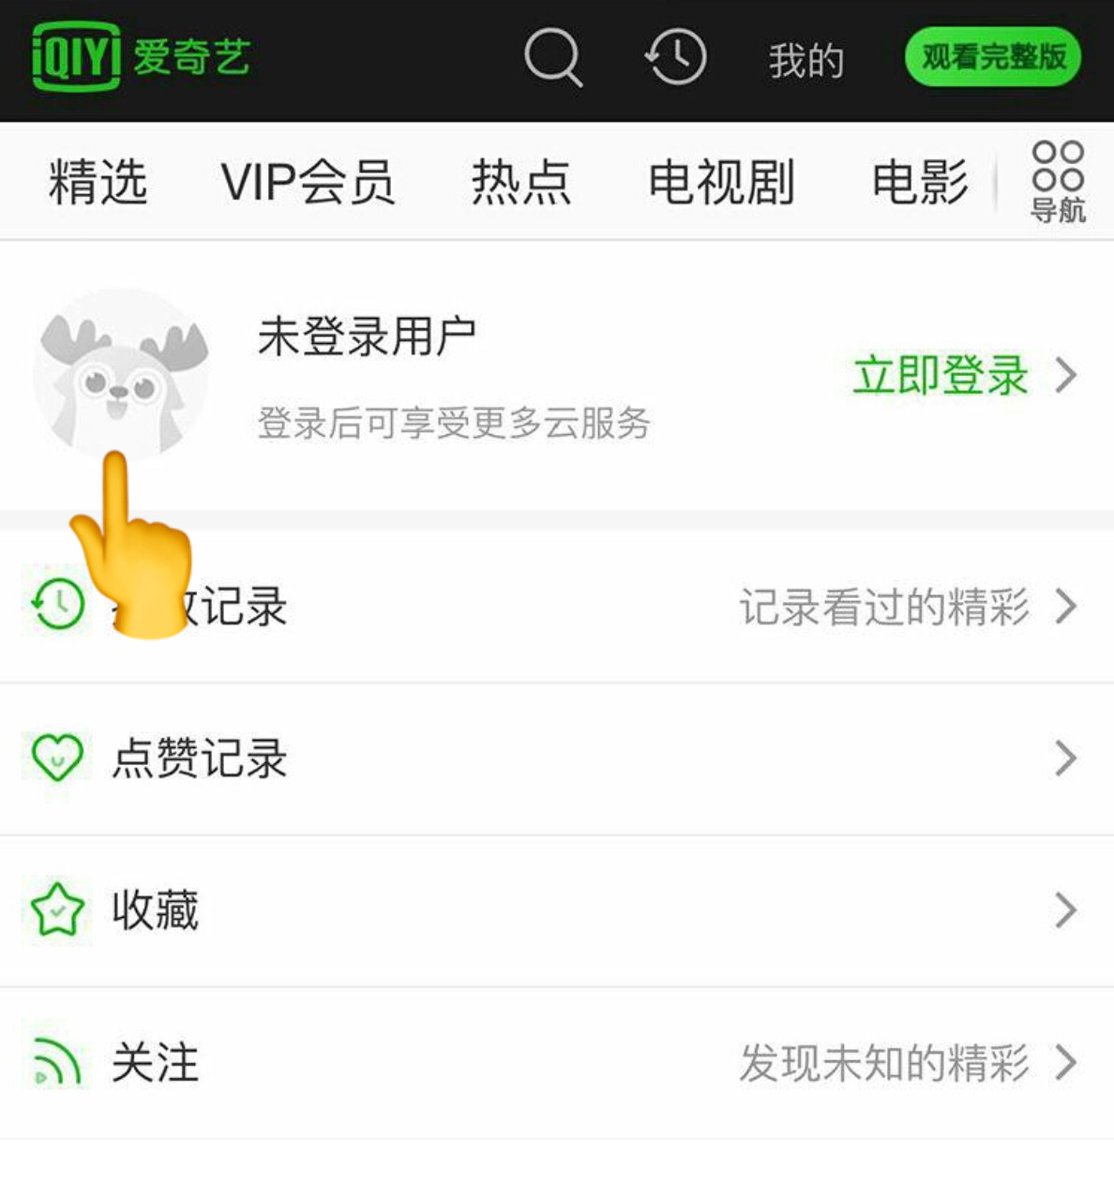 2. Open new tab and type '  http://m.iqiyi.com  ' into the search bar & press on the icon (pic 1) then press on picture to log in (pic 2)